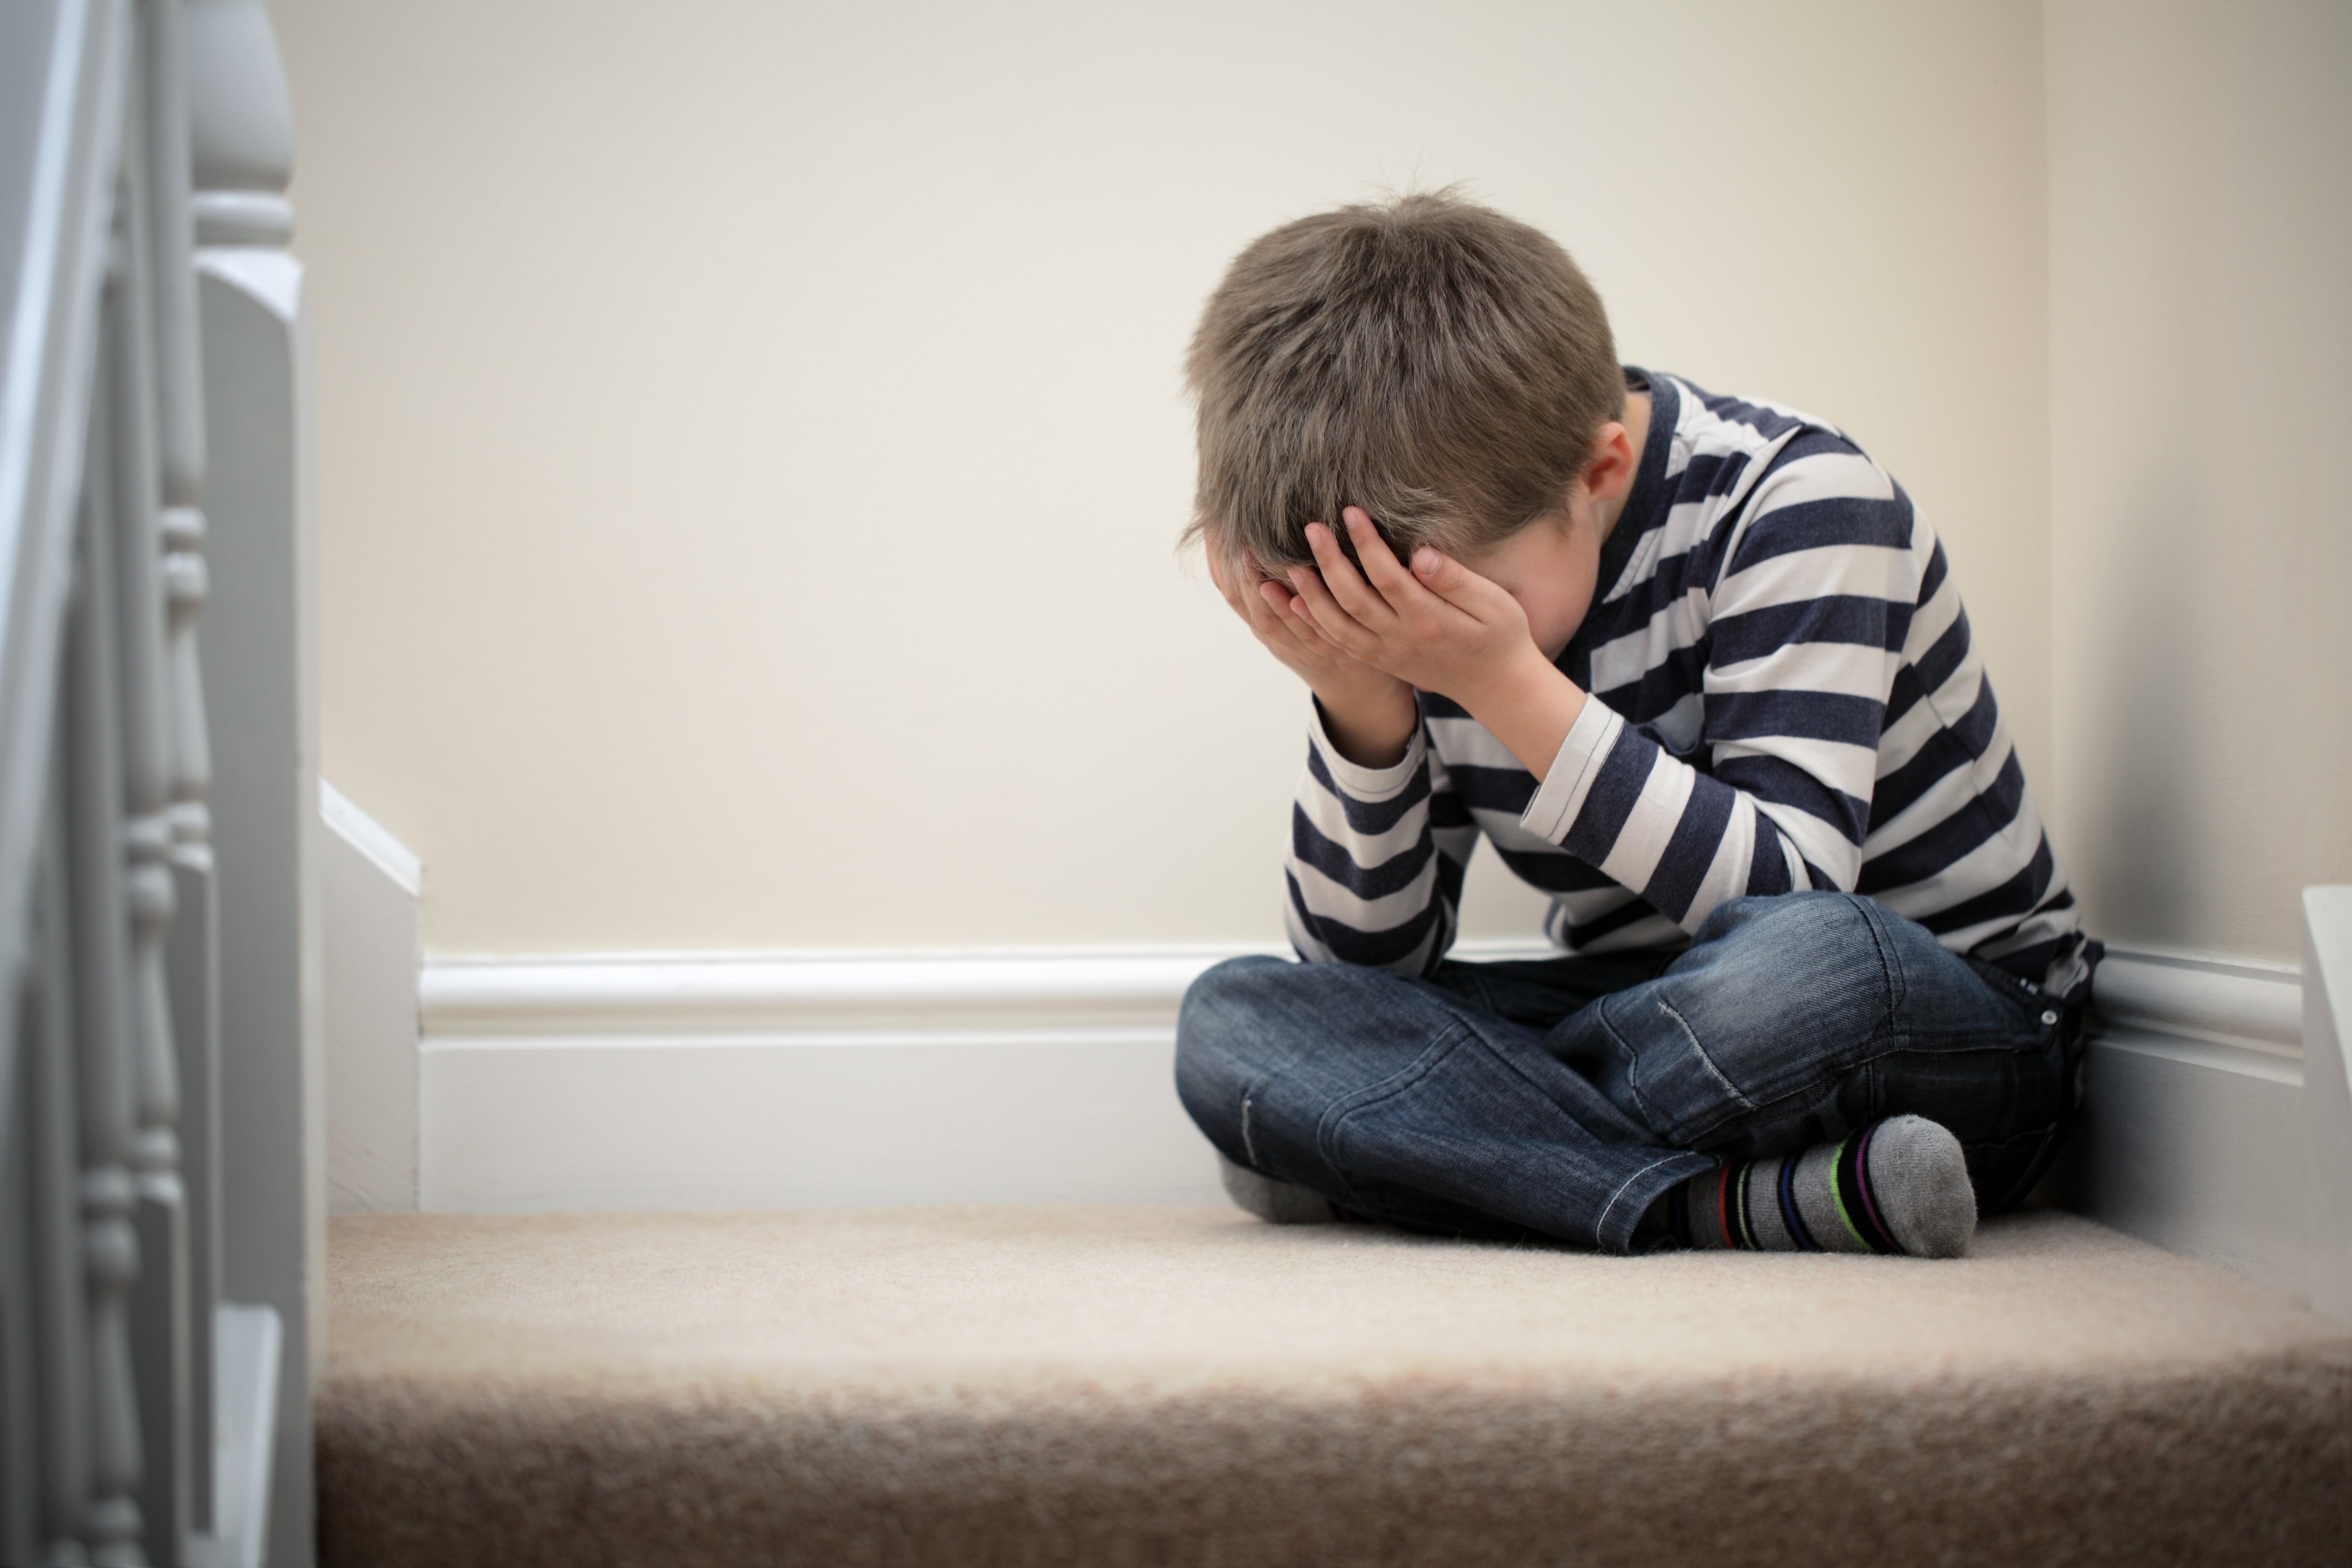 Rising pressure on households to meet costs negatively impacts children’s mental health